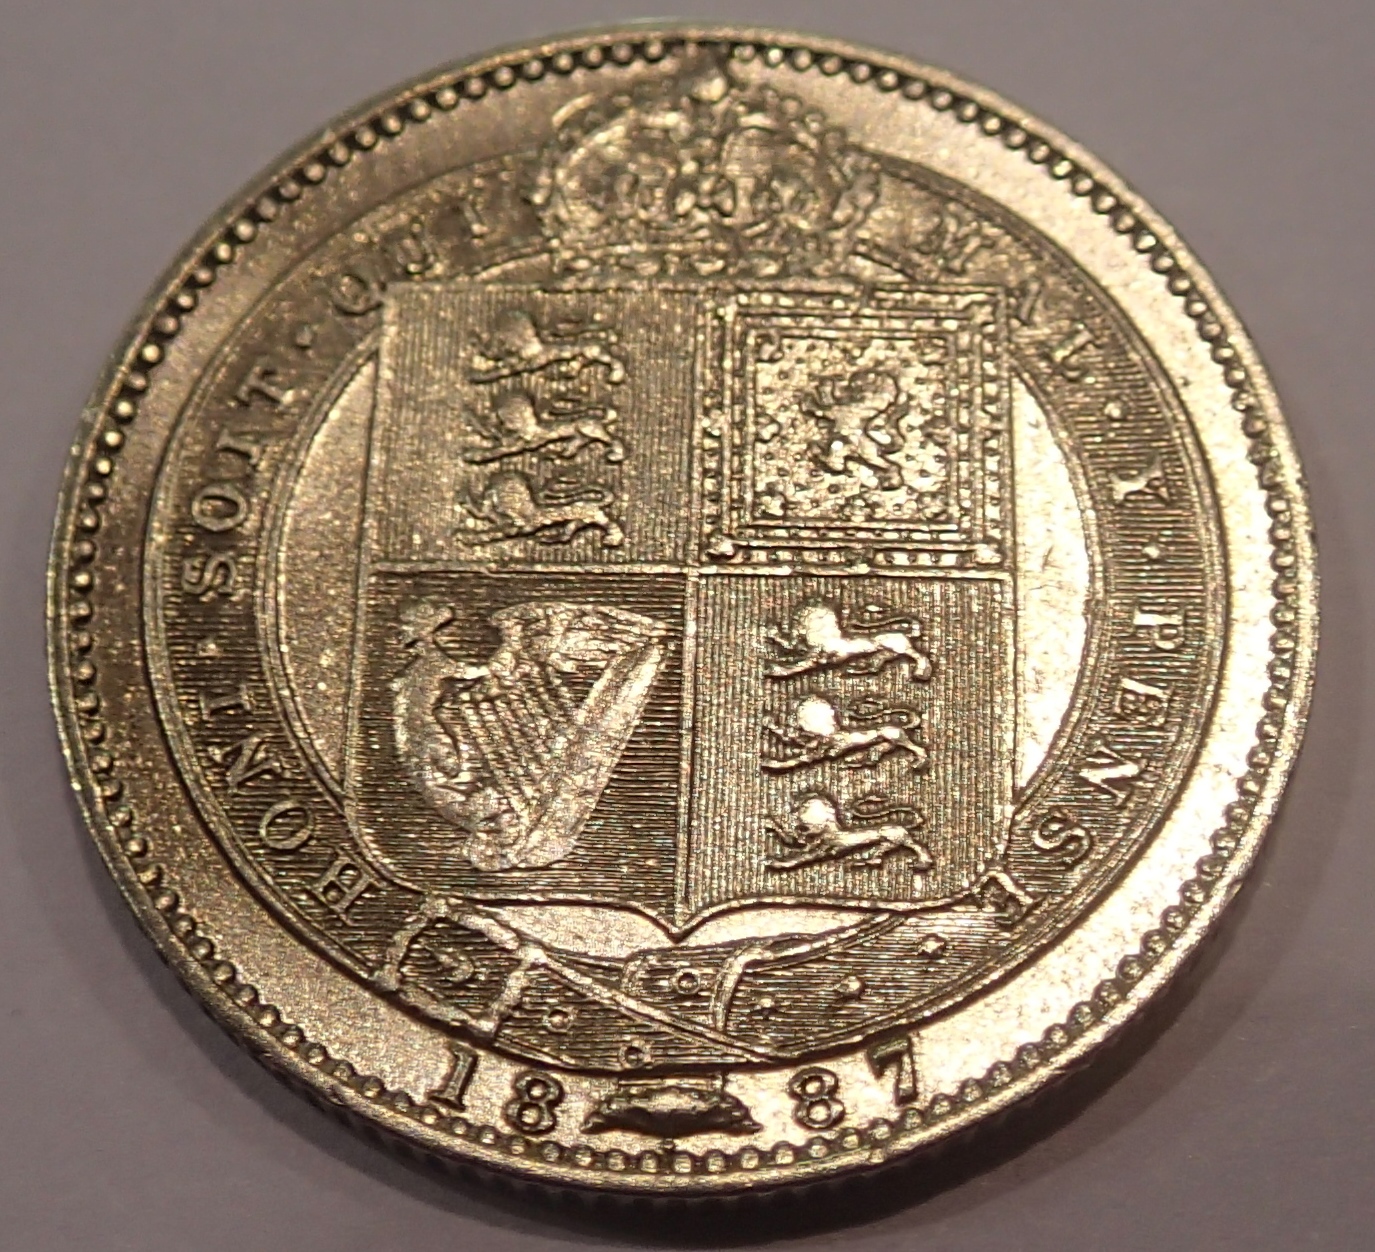 Silver Shilling of Queen Victoria - 1887 - JEB in exergue. P&P Group 1 (£14+VAT for the first lot - Image 2 of 2